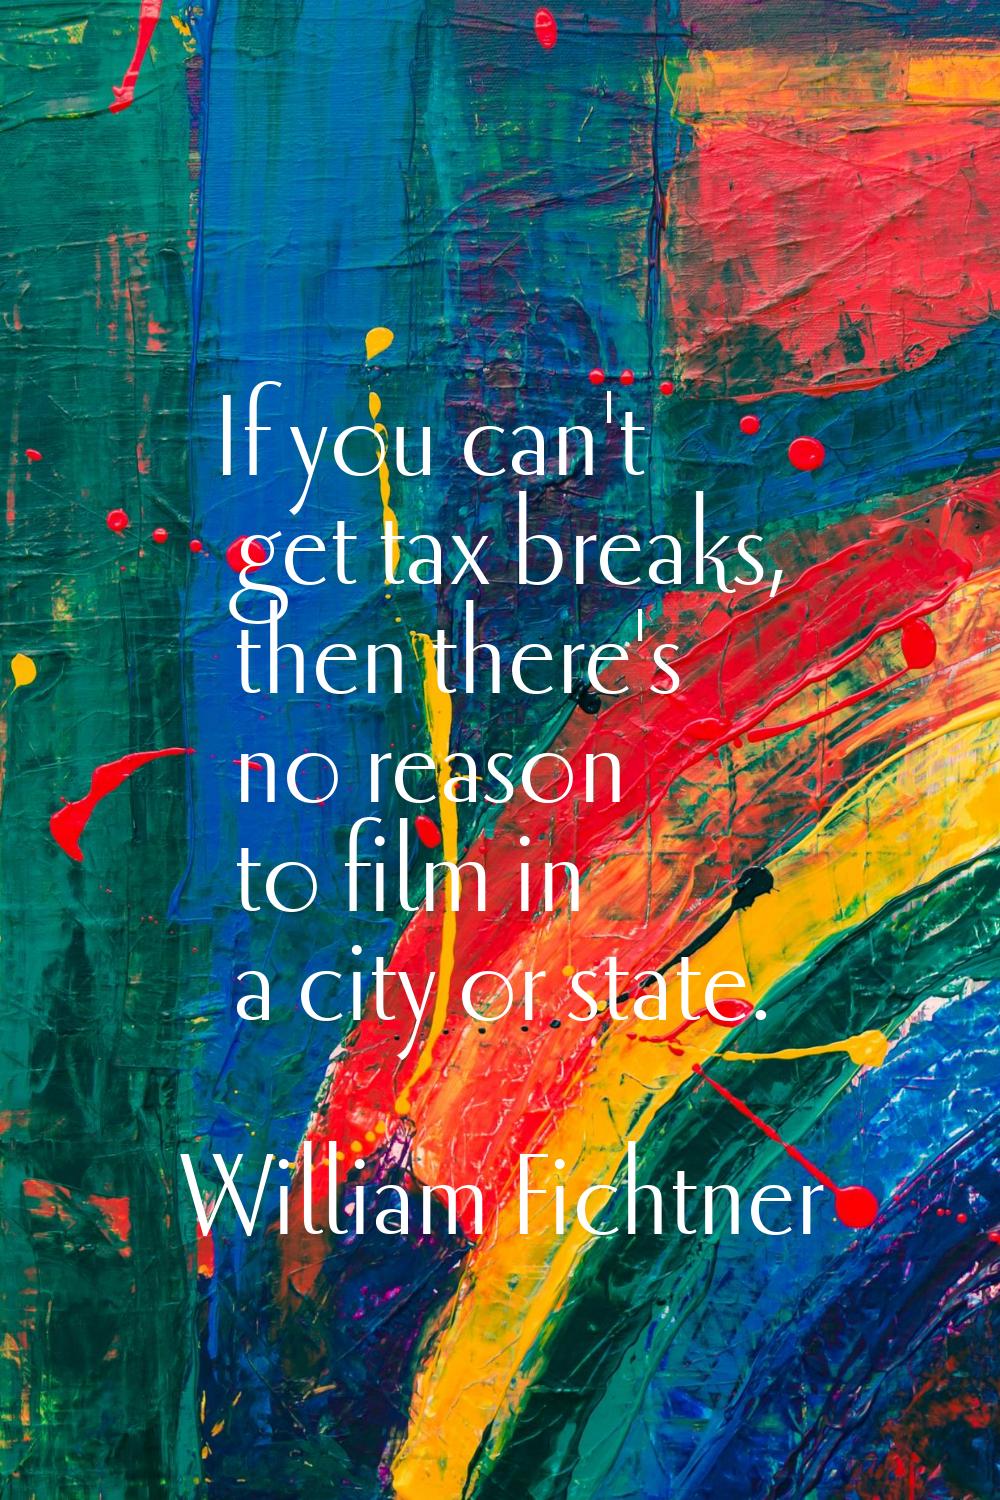 If you can't get tax breaks, then there's no reason to film in a city or state.